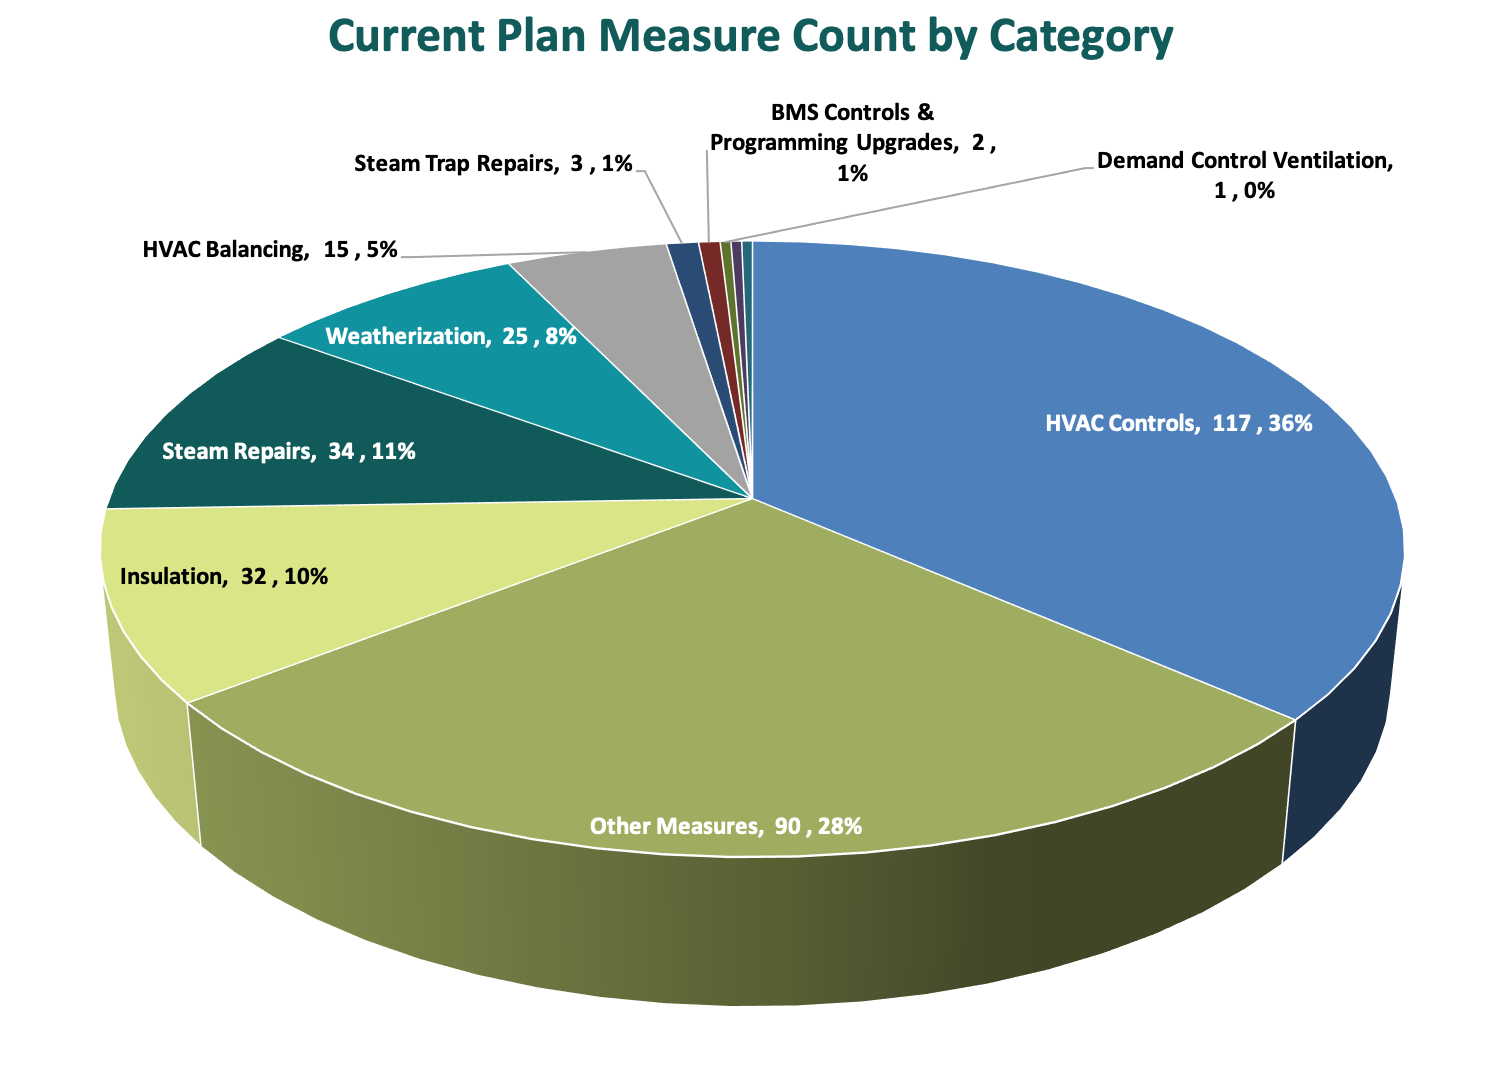 Pie chart showing current plan measure count by category.